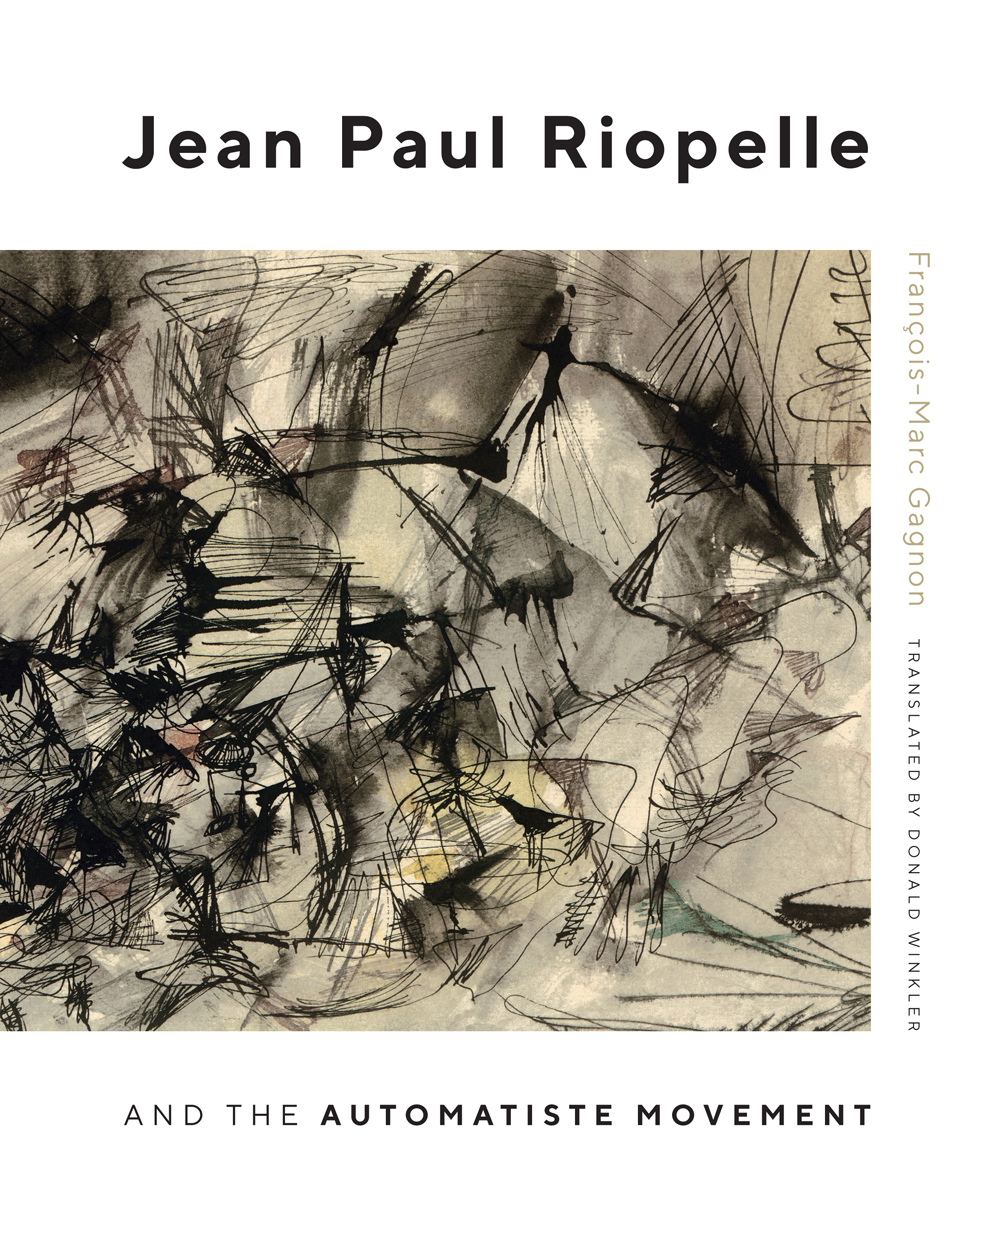 Jean Paul Riopelle and the Automatiste Movement